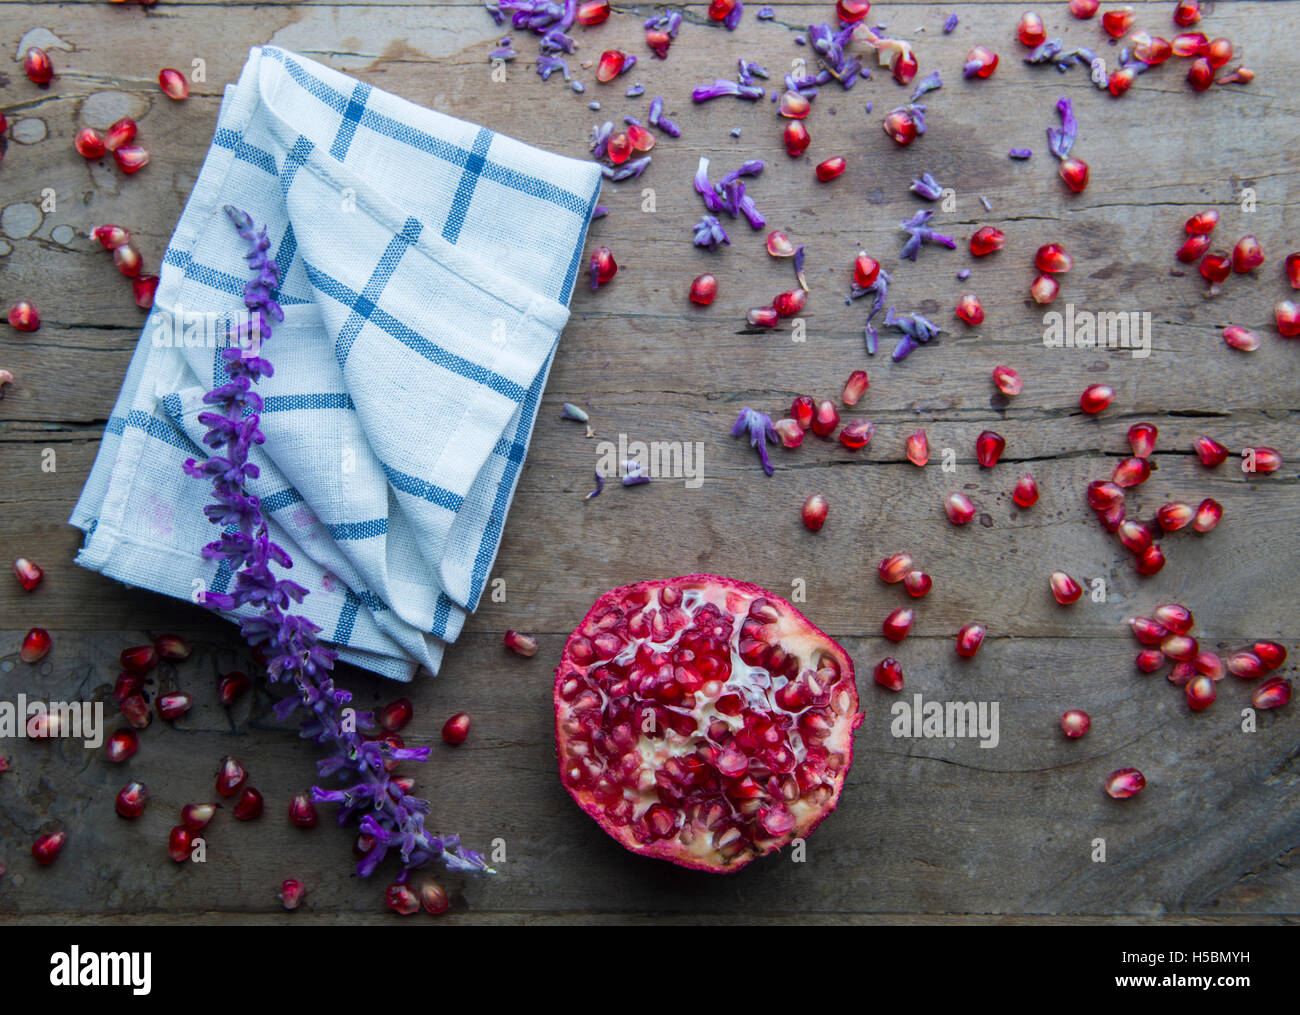 lavender leaf and pomegranate on a wooden table Stock Photo